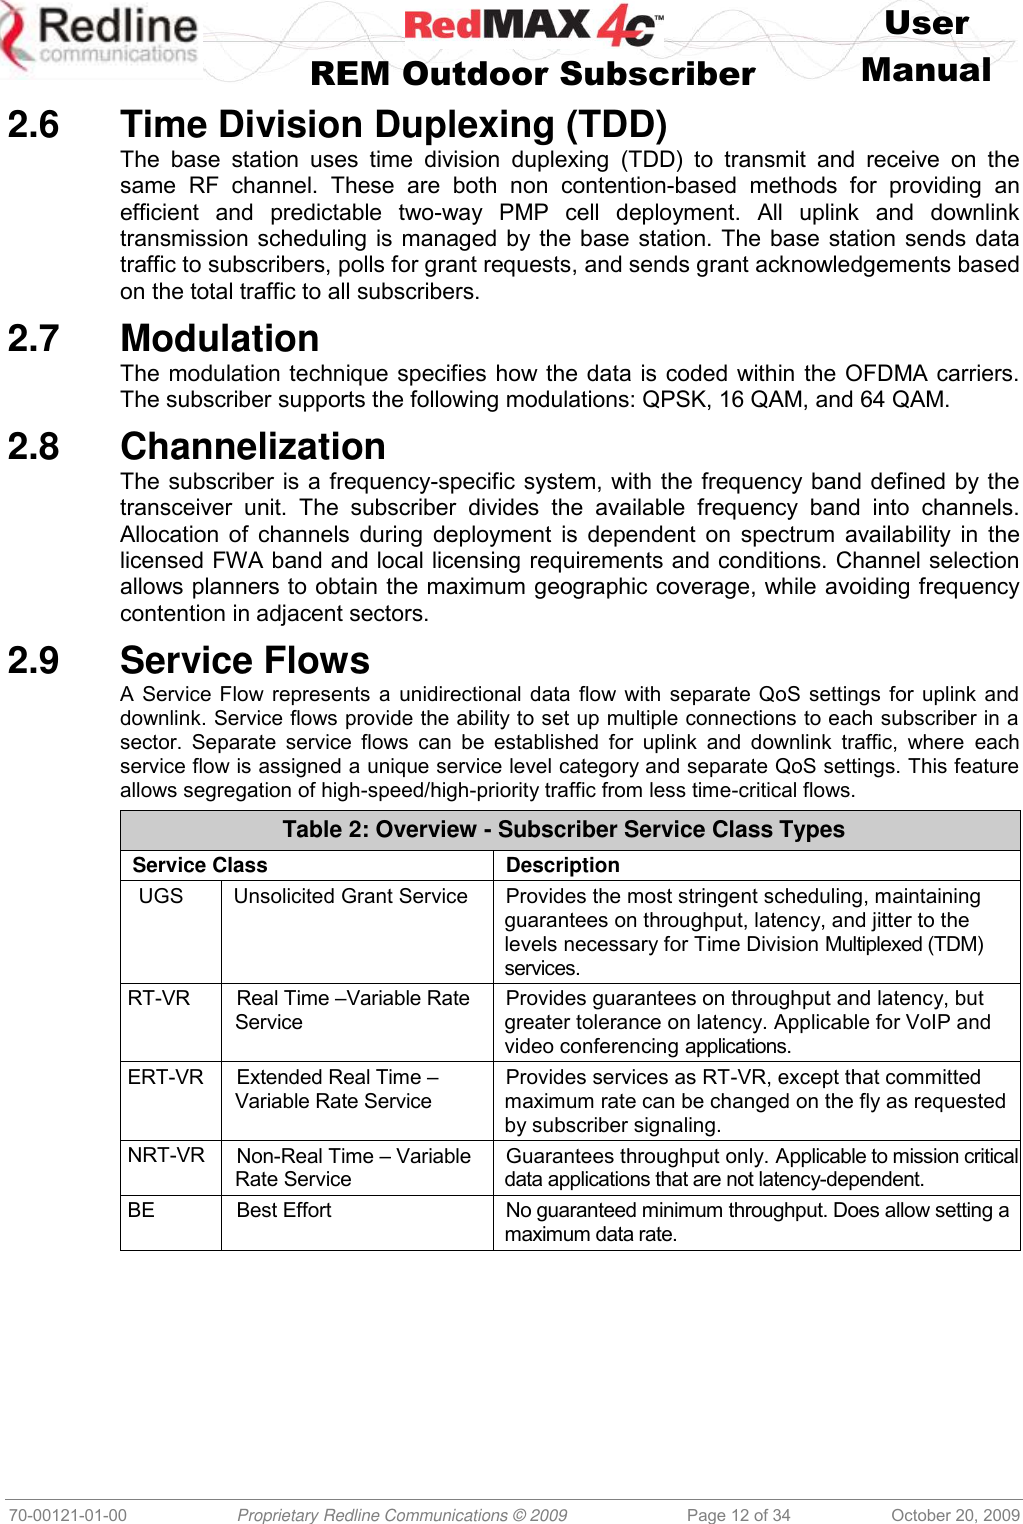    User   REM Outdoor Subscriber  Manual   70-00121-01-00 Proprietary Redline Communications © 2009 Page 12 of 34 October 20, 2009 2.6  Time Division Duplexing (TDD) The  base  station  uses  time  division  duplexing  (TDD)  to  transmit  and  receive  on  the same  RF  channel.  These  are  both  non  contention-based  methods  for  providing  an efficient  and  predictable  two-way  PMP  cell  deployment.  All  uplink  and  downlink transmission scheduling is managed by the base station. The base station sends data traffic to subscribers, polls for grant requests, and sends grant acknowledgements based on the total traffic to all subscribers. 2.7  Modulation The modulation technique specifies how the data is coded within the OFDMA carriers. The subscriber supports the following modulations: QPSK, 16 QAM, and 64 QAM. 2.8  Channelization The subscriber is a frequency-specific system, with the frequency band defined by the transceiver  unit.  The  subscriber  divides  the  available  frequency  band  into  channels. Allocation of channels during deployment is dependent on spectrum availability in the licensed FWA band and local licensing requirements and conditions. Channel selection allows planners to obtain the maximum geographic coverage, while avoiding frequency contention in adjacent sectors. 2.9  Service Flows A Service Flow represents a unidirectional data flow with separate QoS settings for uplink and downlink. Service flows provide the ability to set up multiple connections to each subscriber in a sector.  Separate  service  flows  can  be  established  for  uplink  and  downlink  traffic,  where  each service flow is assigned a unique service level category and separate QoS settings. This feature allows segregation of high-speed/high-priority traffic from less time-critical flows. Table 2: Overview - Subscriber Service Class Types Service Class Description UGS Unsolicited Grant Service Provides the most stringent scheduling, maintaining guarantees on throughput, latency, and jitter to the levels necessary for Time Division Multiplexed (TDM) services. RT-VR  Real Time –Variable Rate Service Provides guarantees on throughput and latency, but greater tolerance on latency. Applicable for VoIP and video conferencing applications. ERT-VR  Extended Real Time –Variable Rate Service Provides services as RT-VR, except that committed maximum rate can be changed on the fly as requested by subscriber signaling. NRT-VR Non-Real Time – Variable Rate Service Guarantees throughput only. Applicable to mission critical data applications that are not latency-dependent. BE Best Effort No guaranteed minimum throughput. Does allow setting a maximum data rate.  